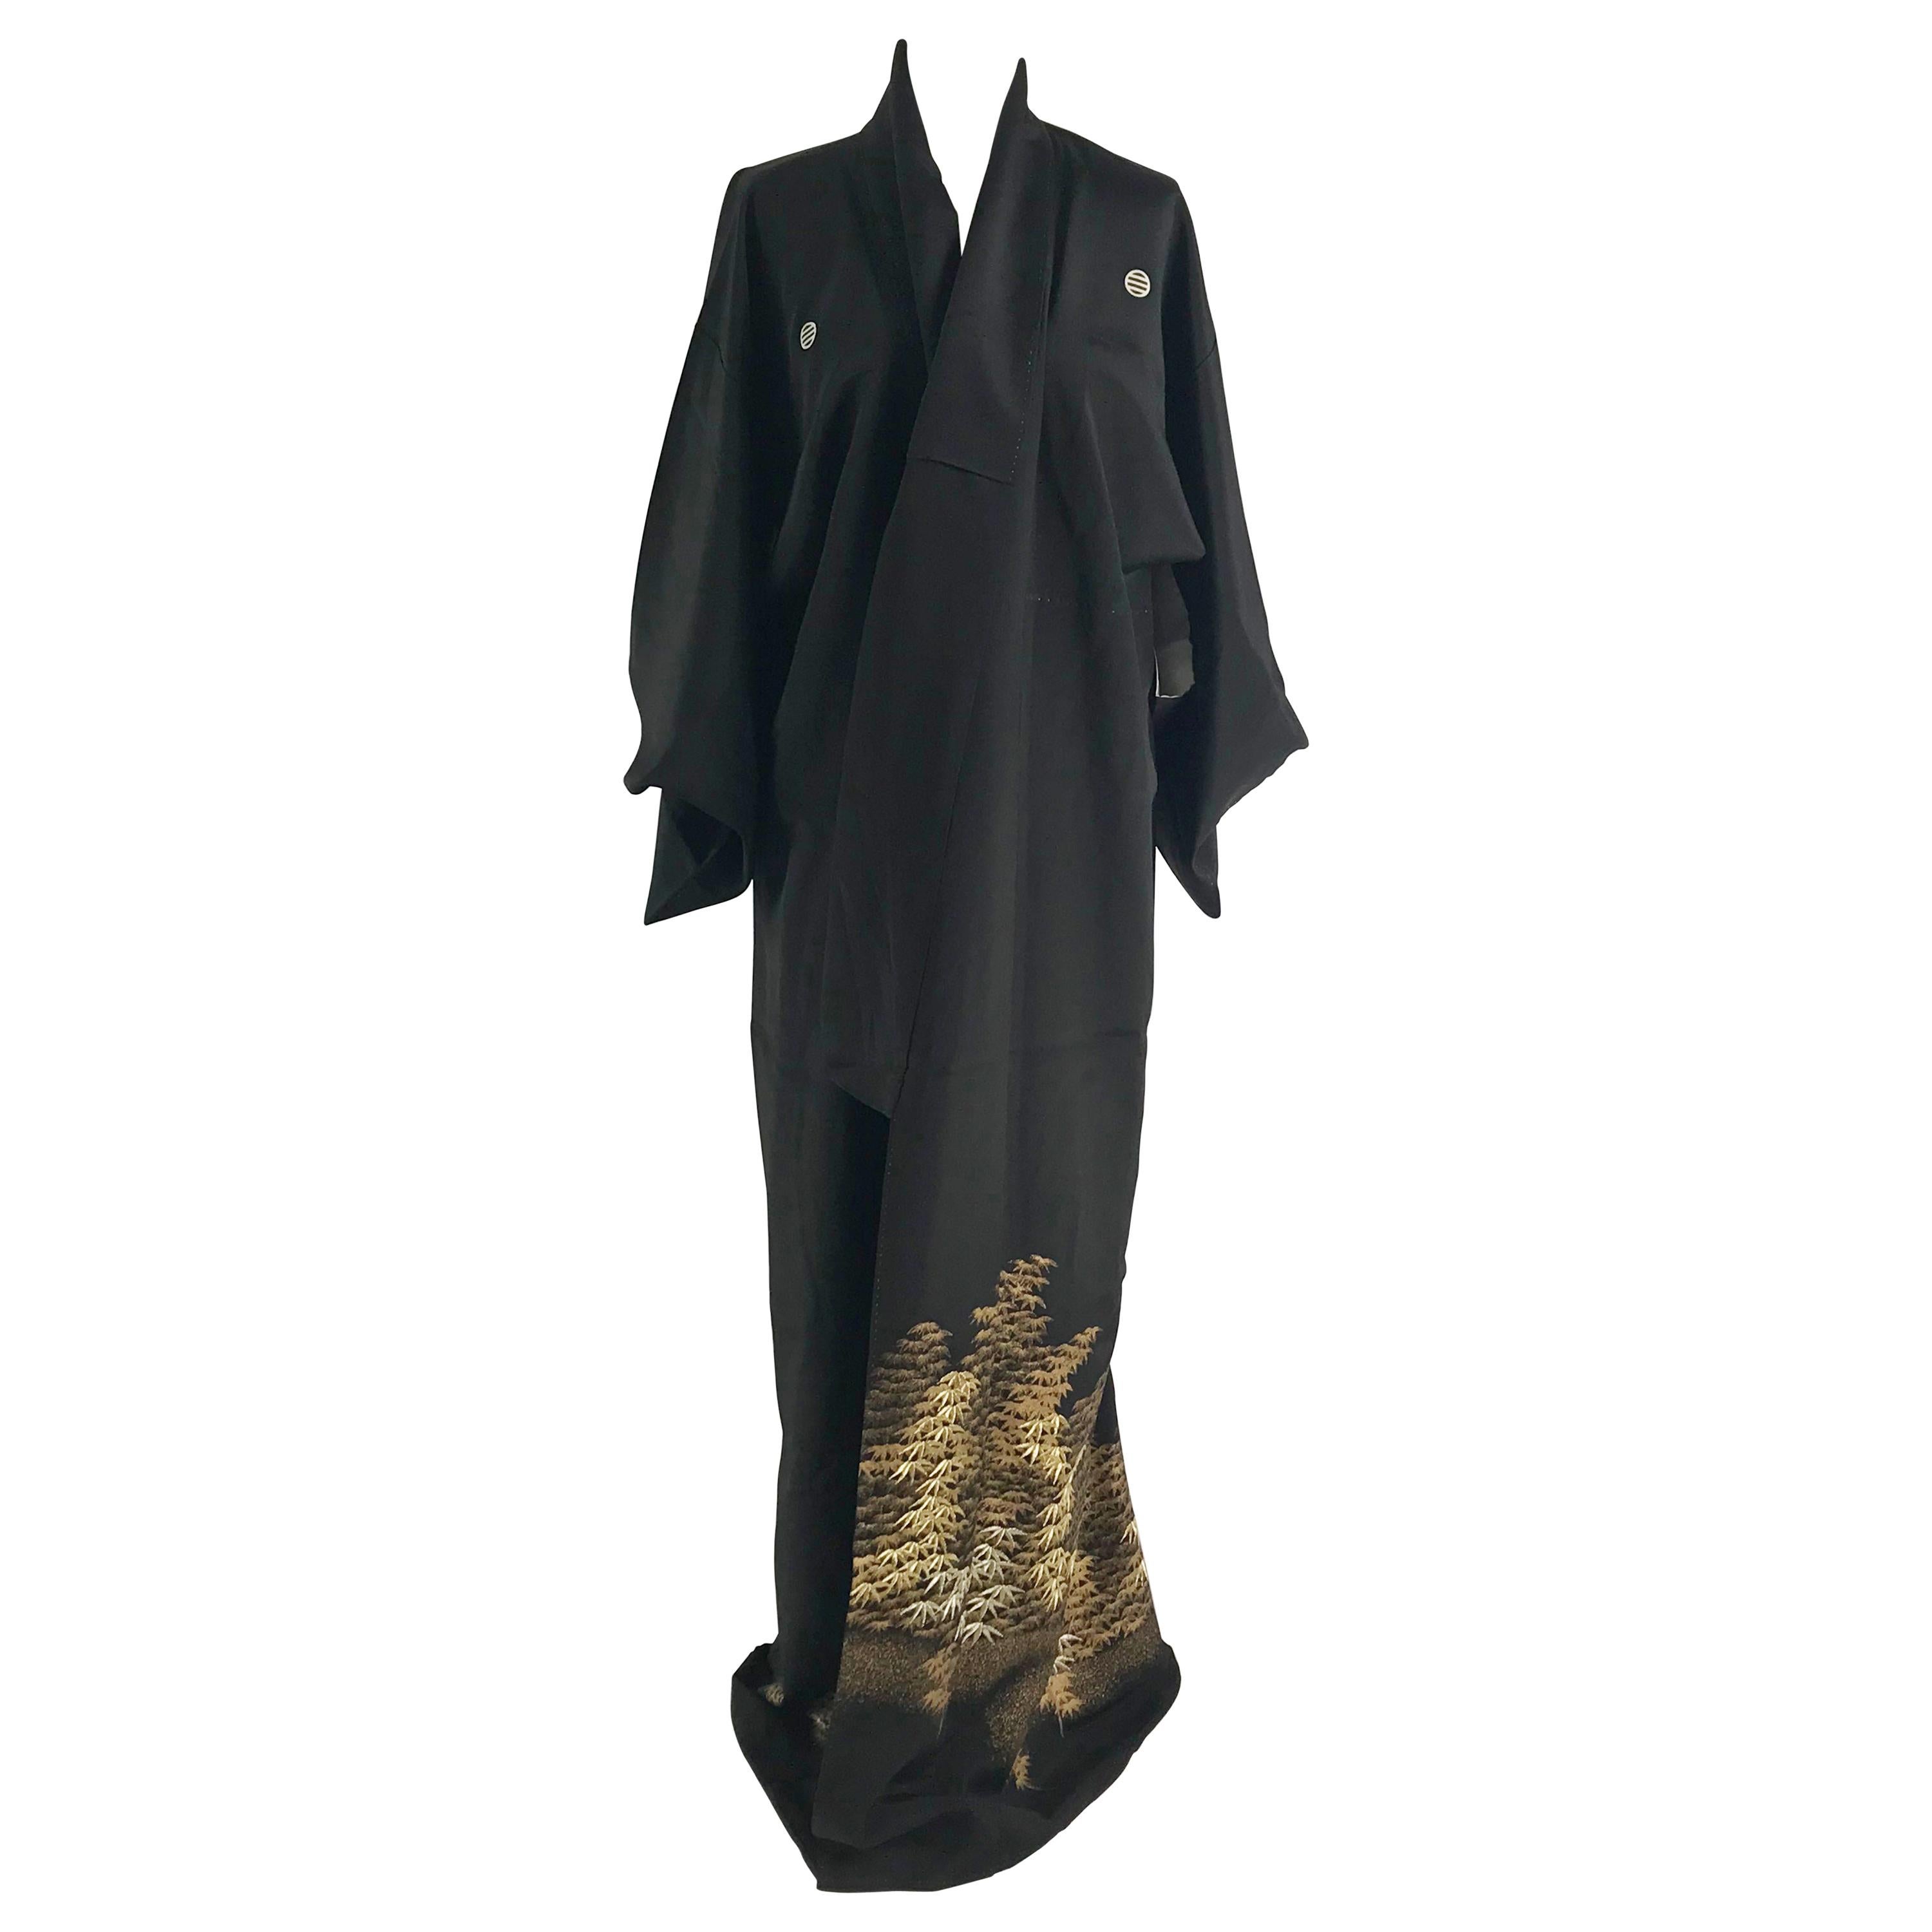 A vintage kimono embroidered and painted with golden maple trees.